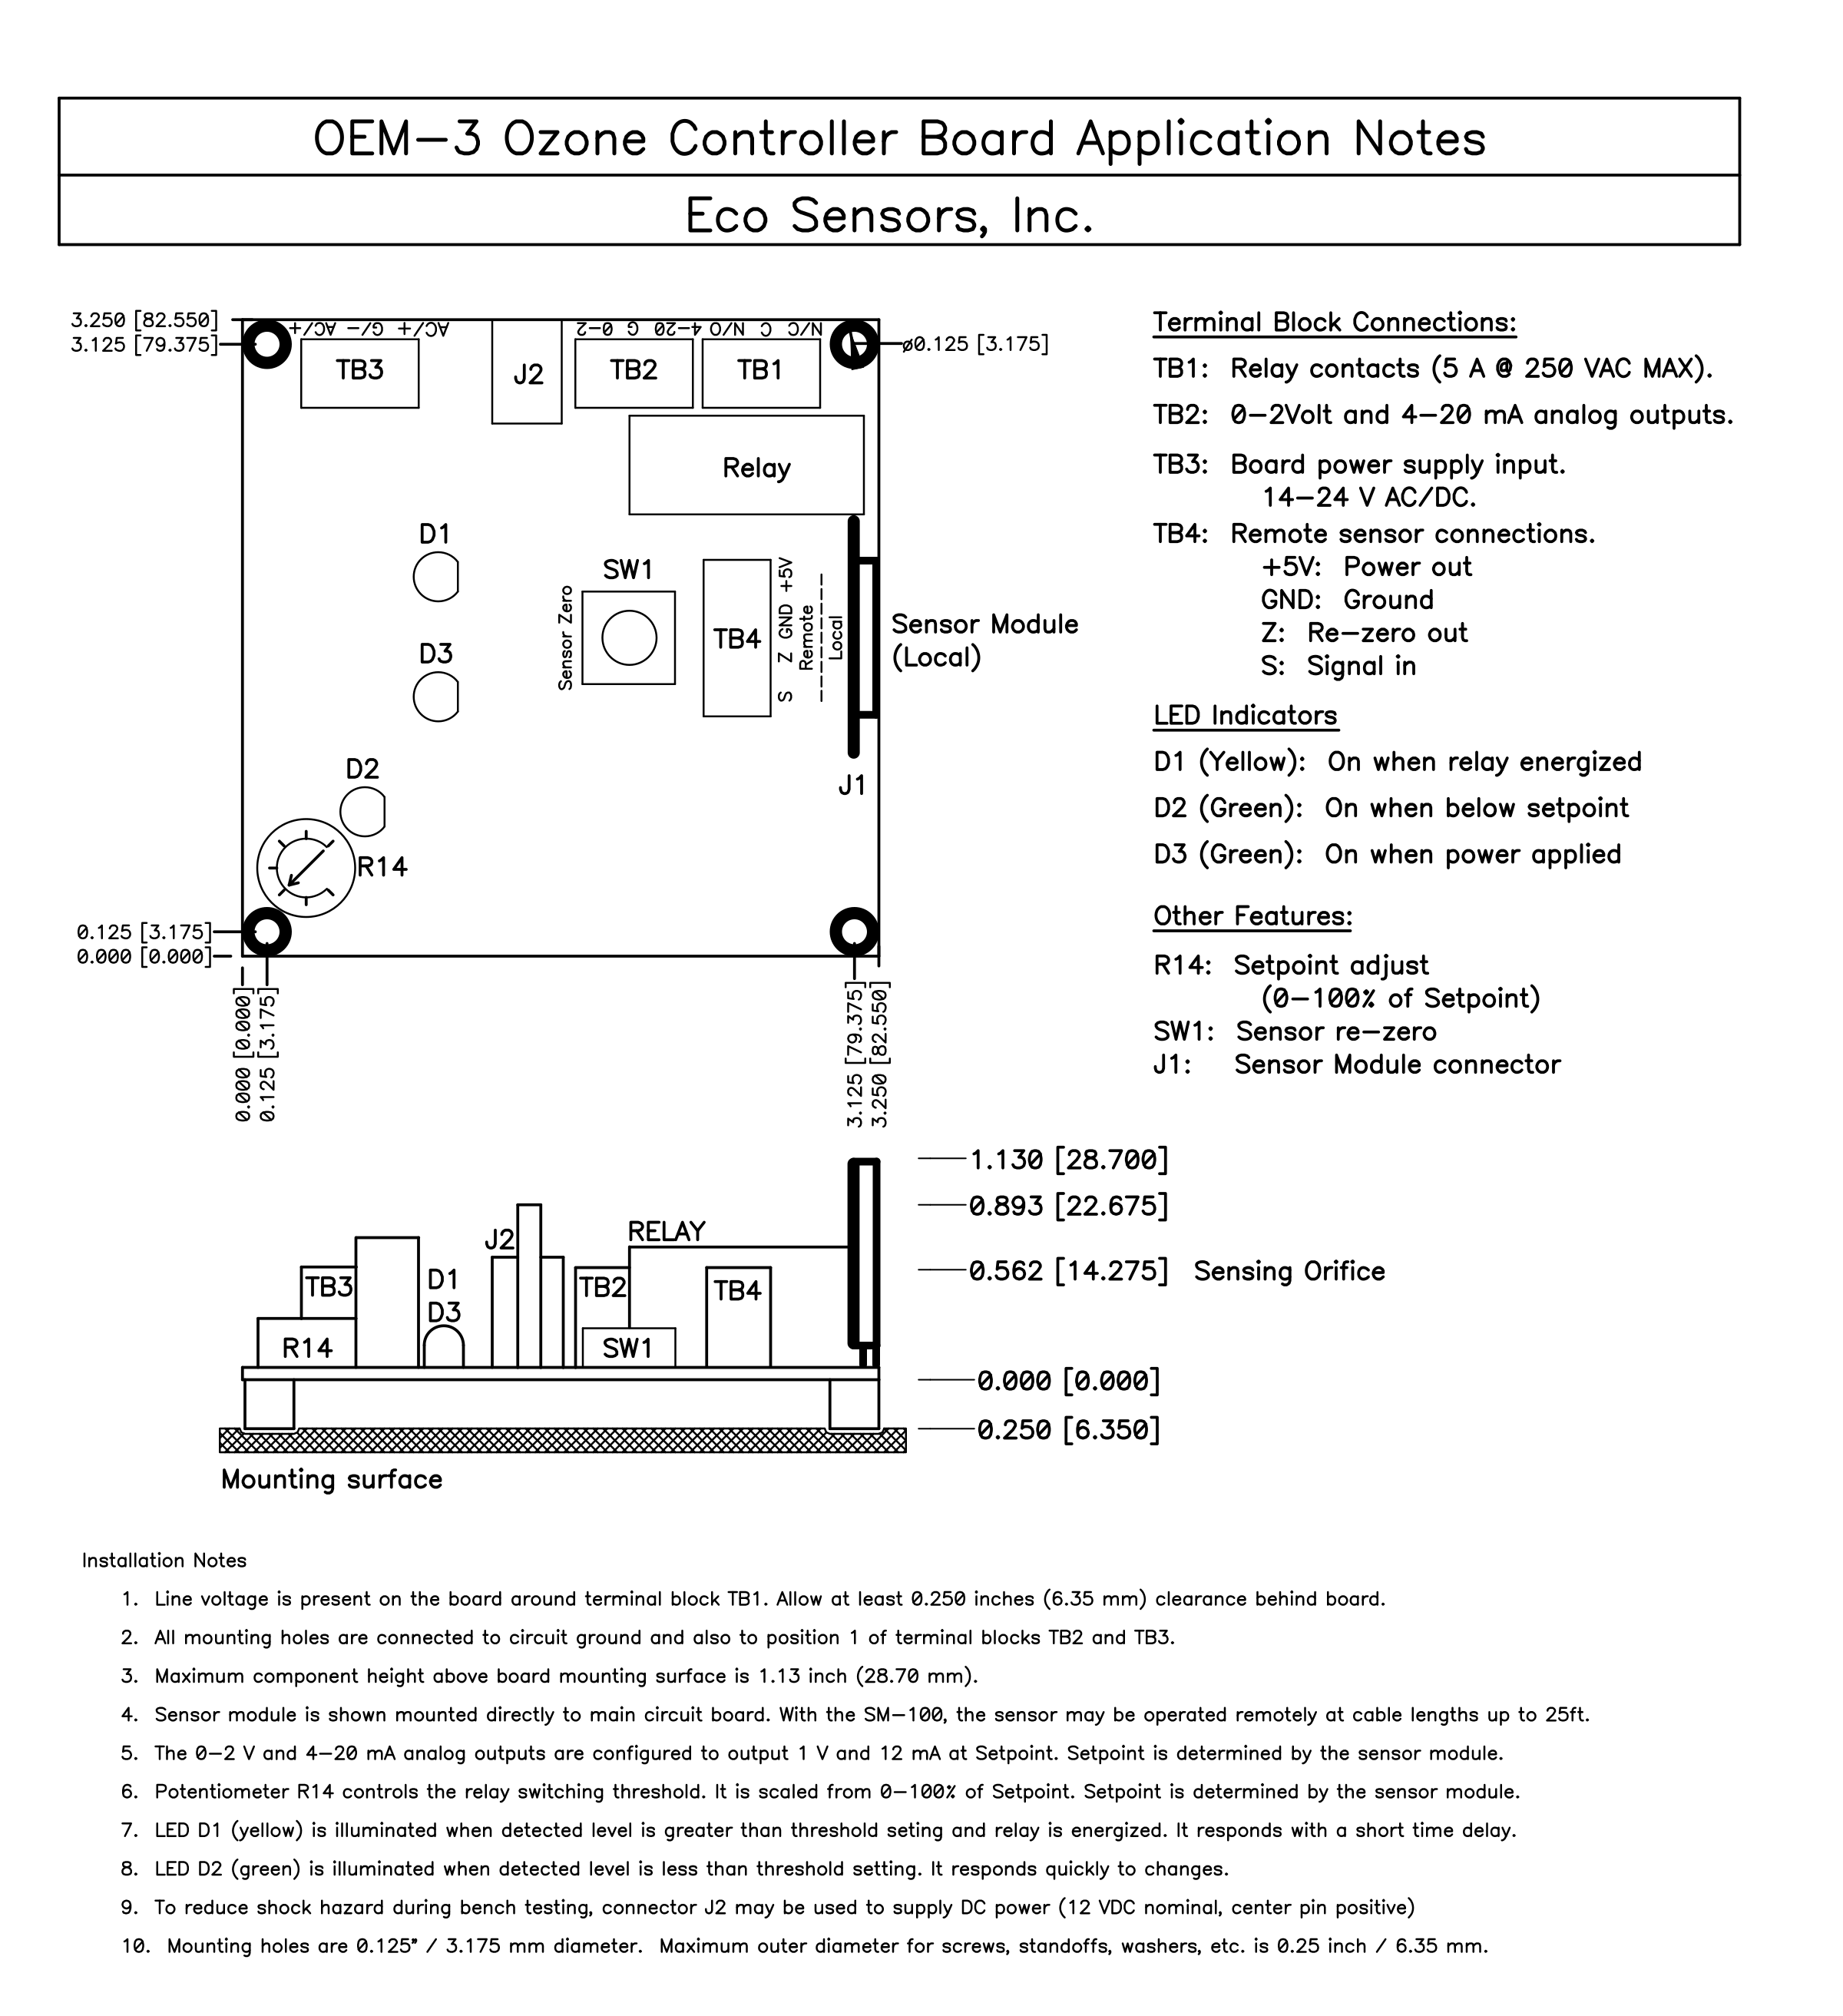 OEM-3 Ozone Controller Board Drawing and Indicator Information